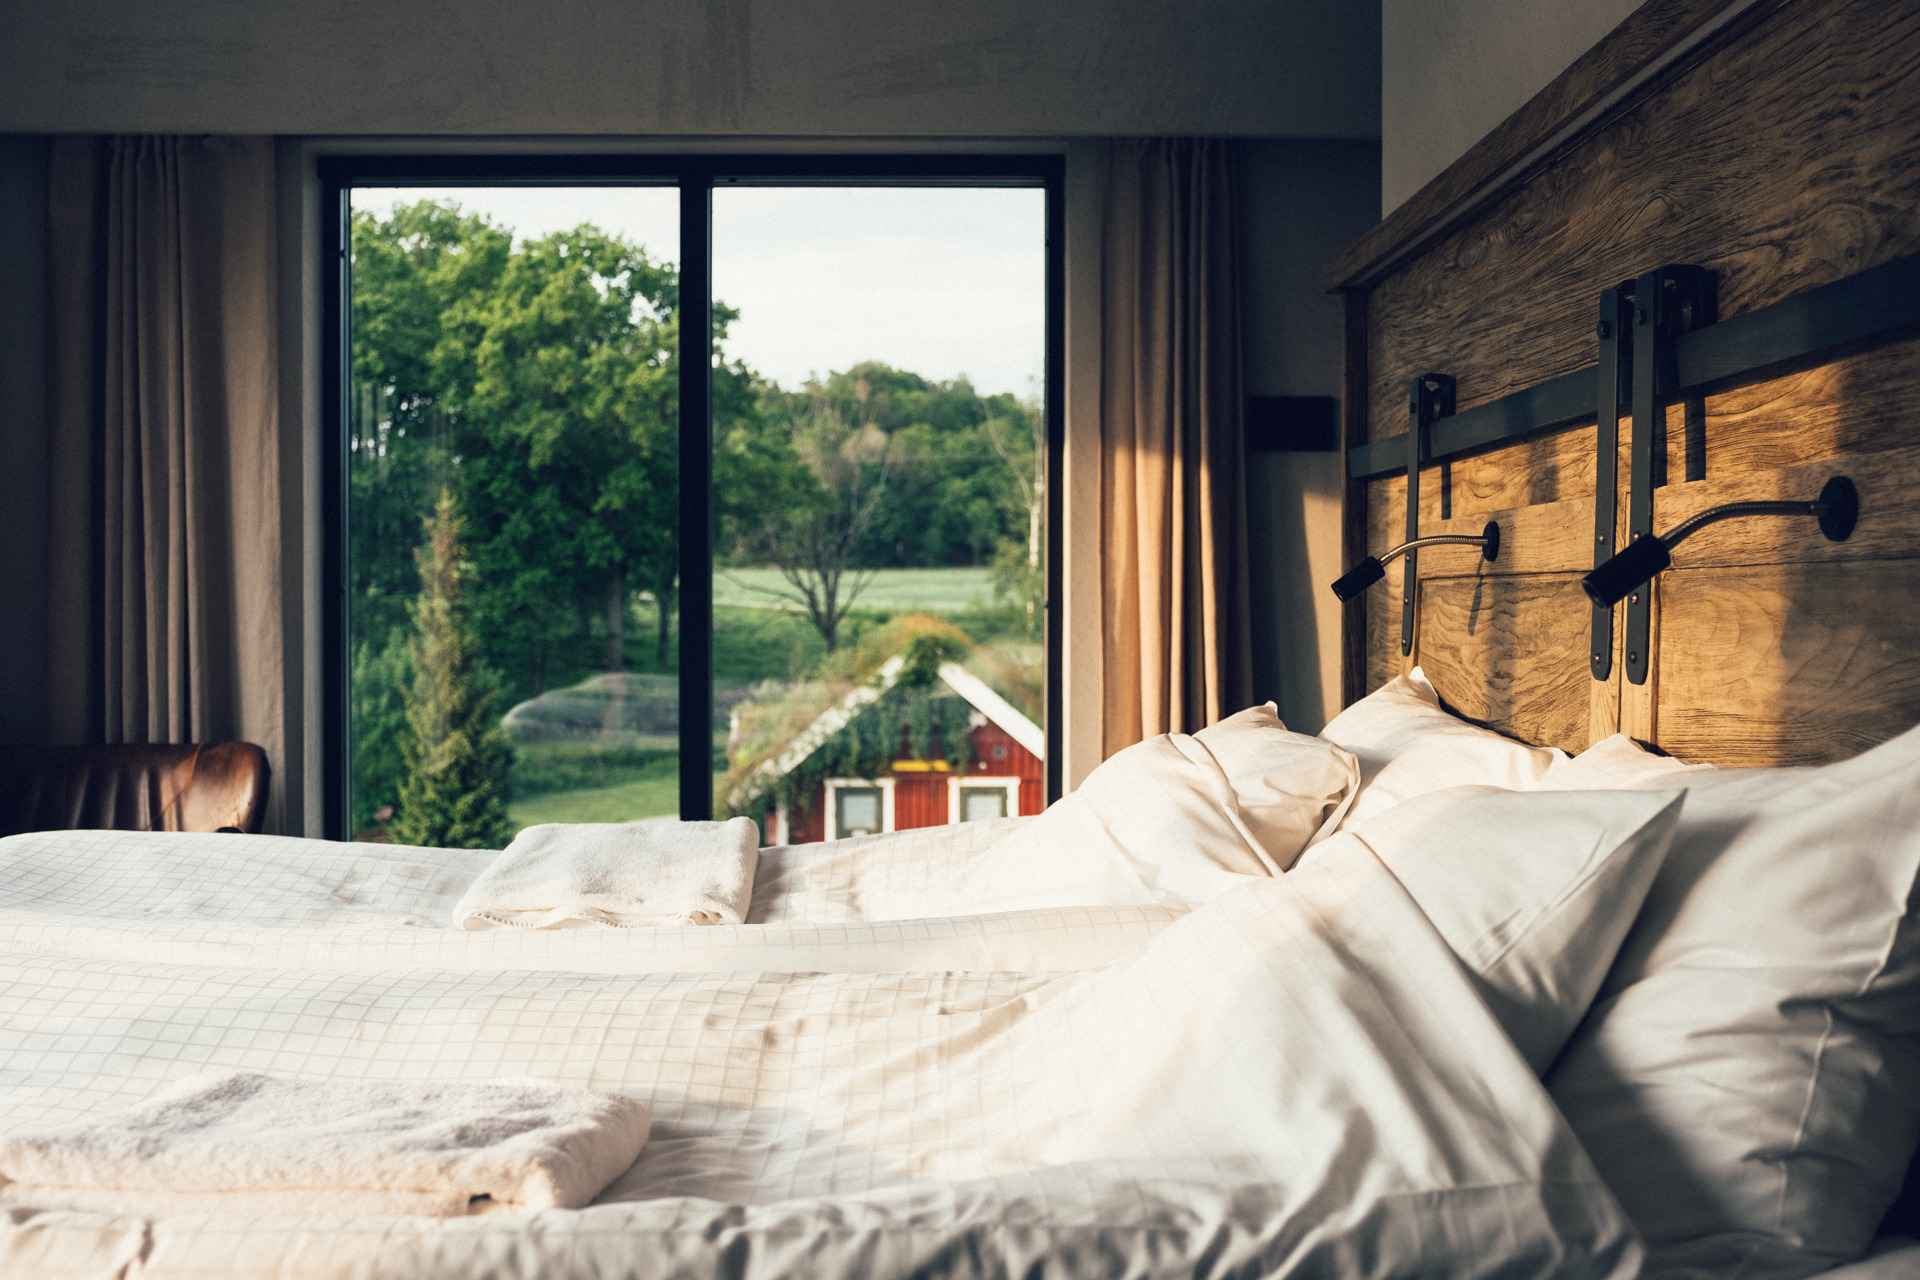 A double bed in a hotel room with windows that look out to a red cabin and a forest.